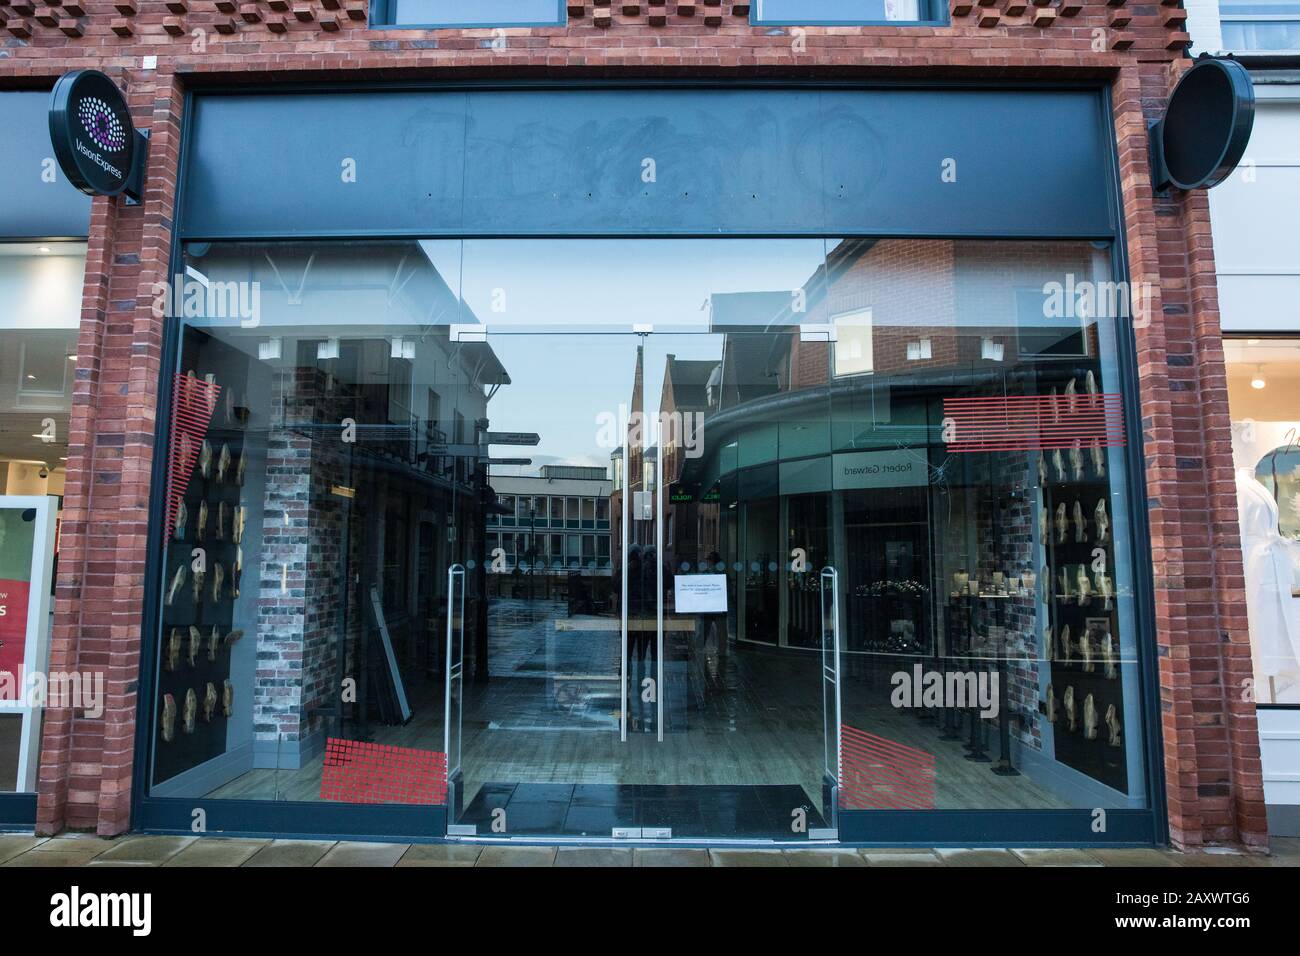 Windsor, UK. 13 February, 2020. A former Timberland store in Windsor Yards,  a shopping area in